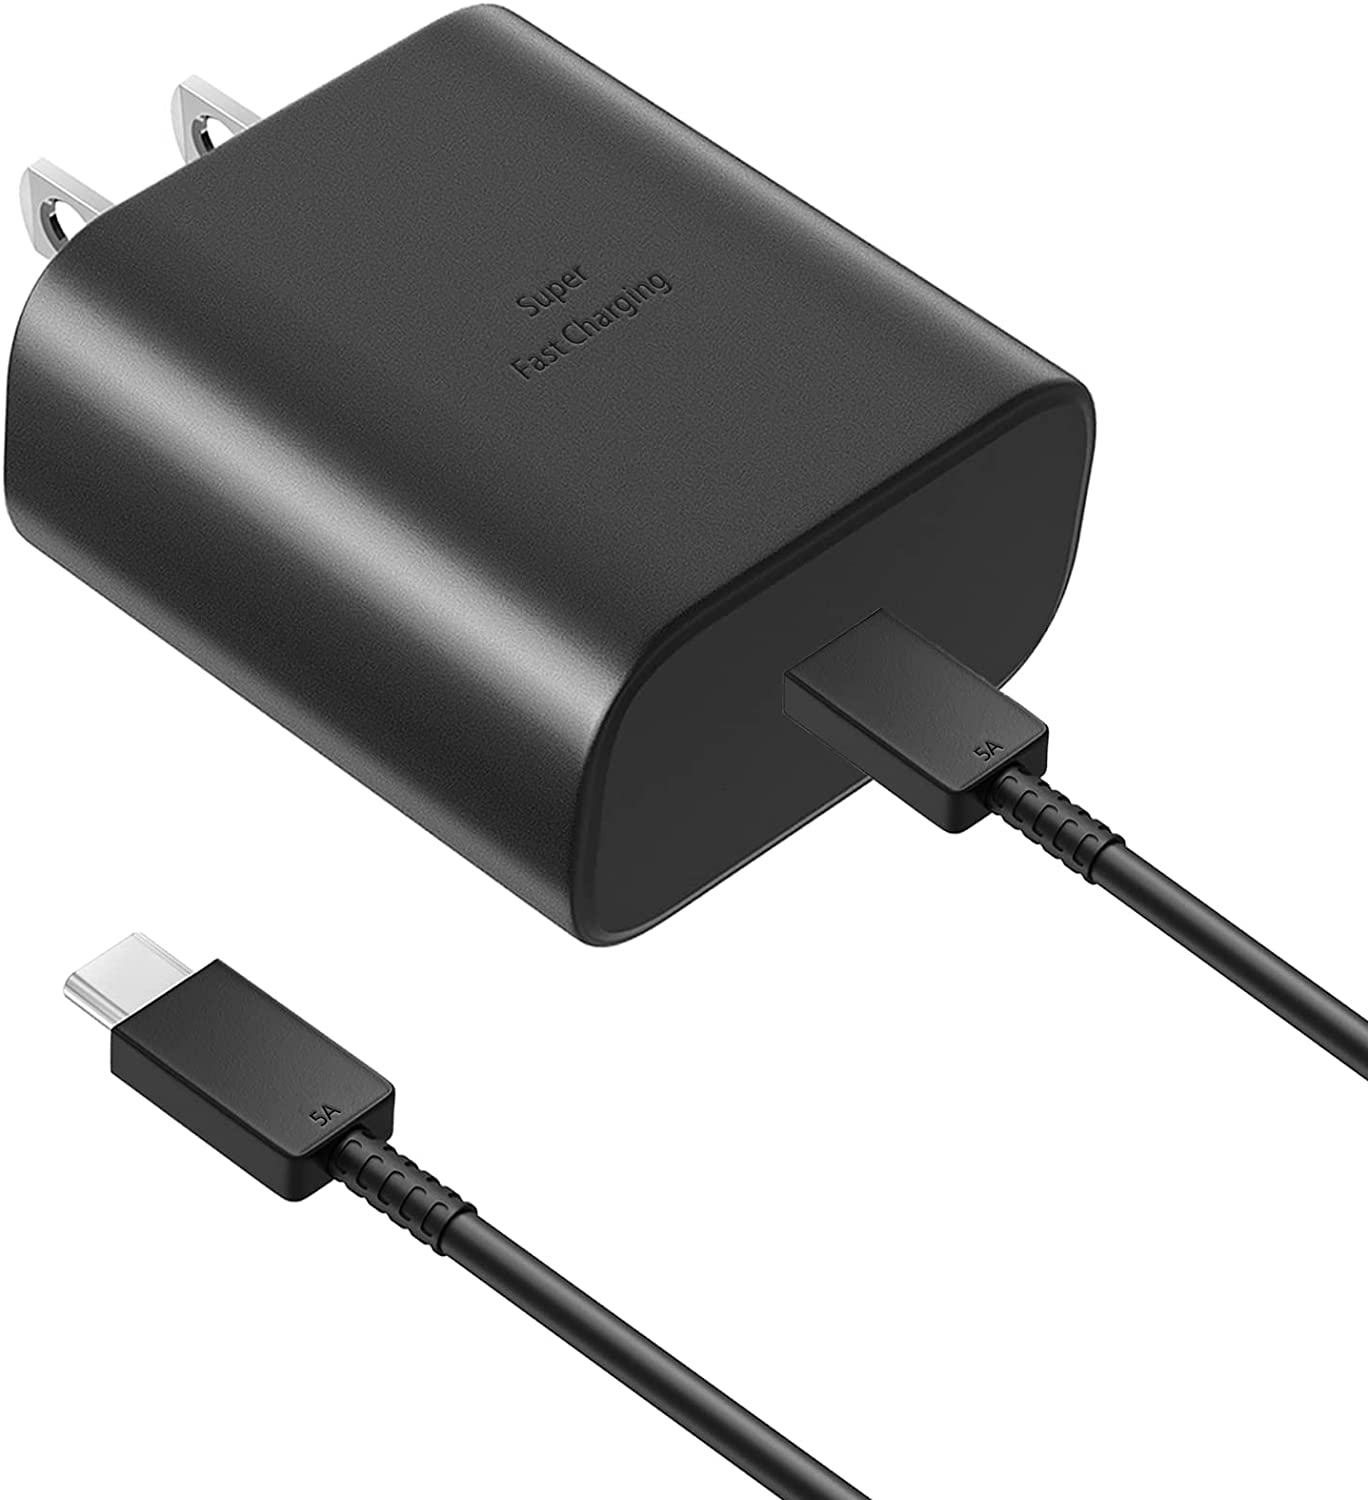 for Huawei P30 Pro New Edition 45W USB-C Super Fast Charging Wall Charger with USB C Cable - Black - image 1 of 5